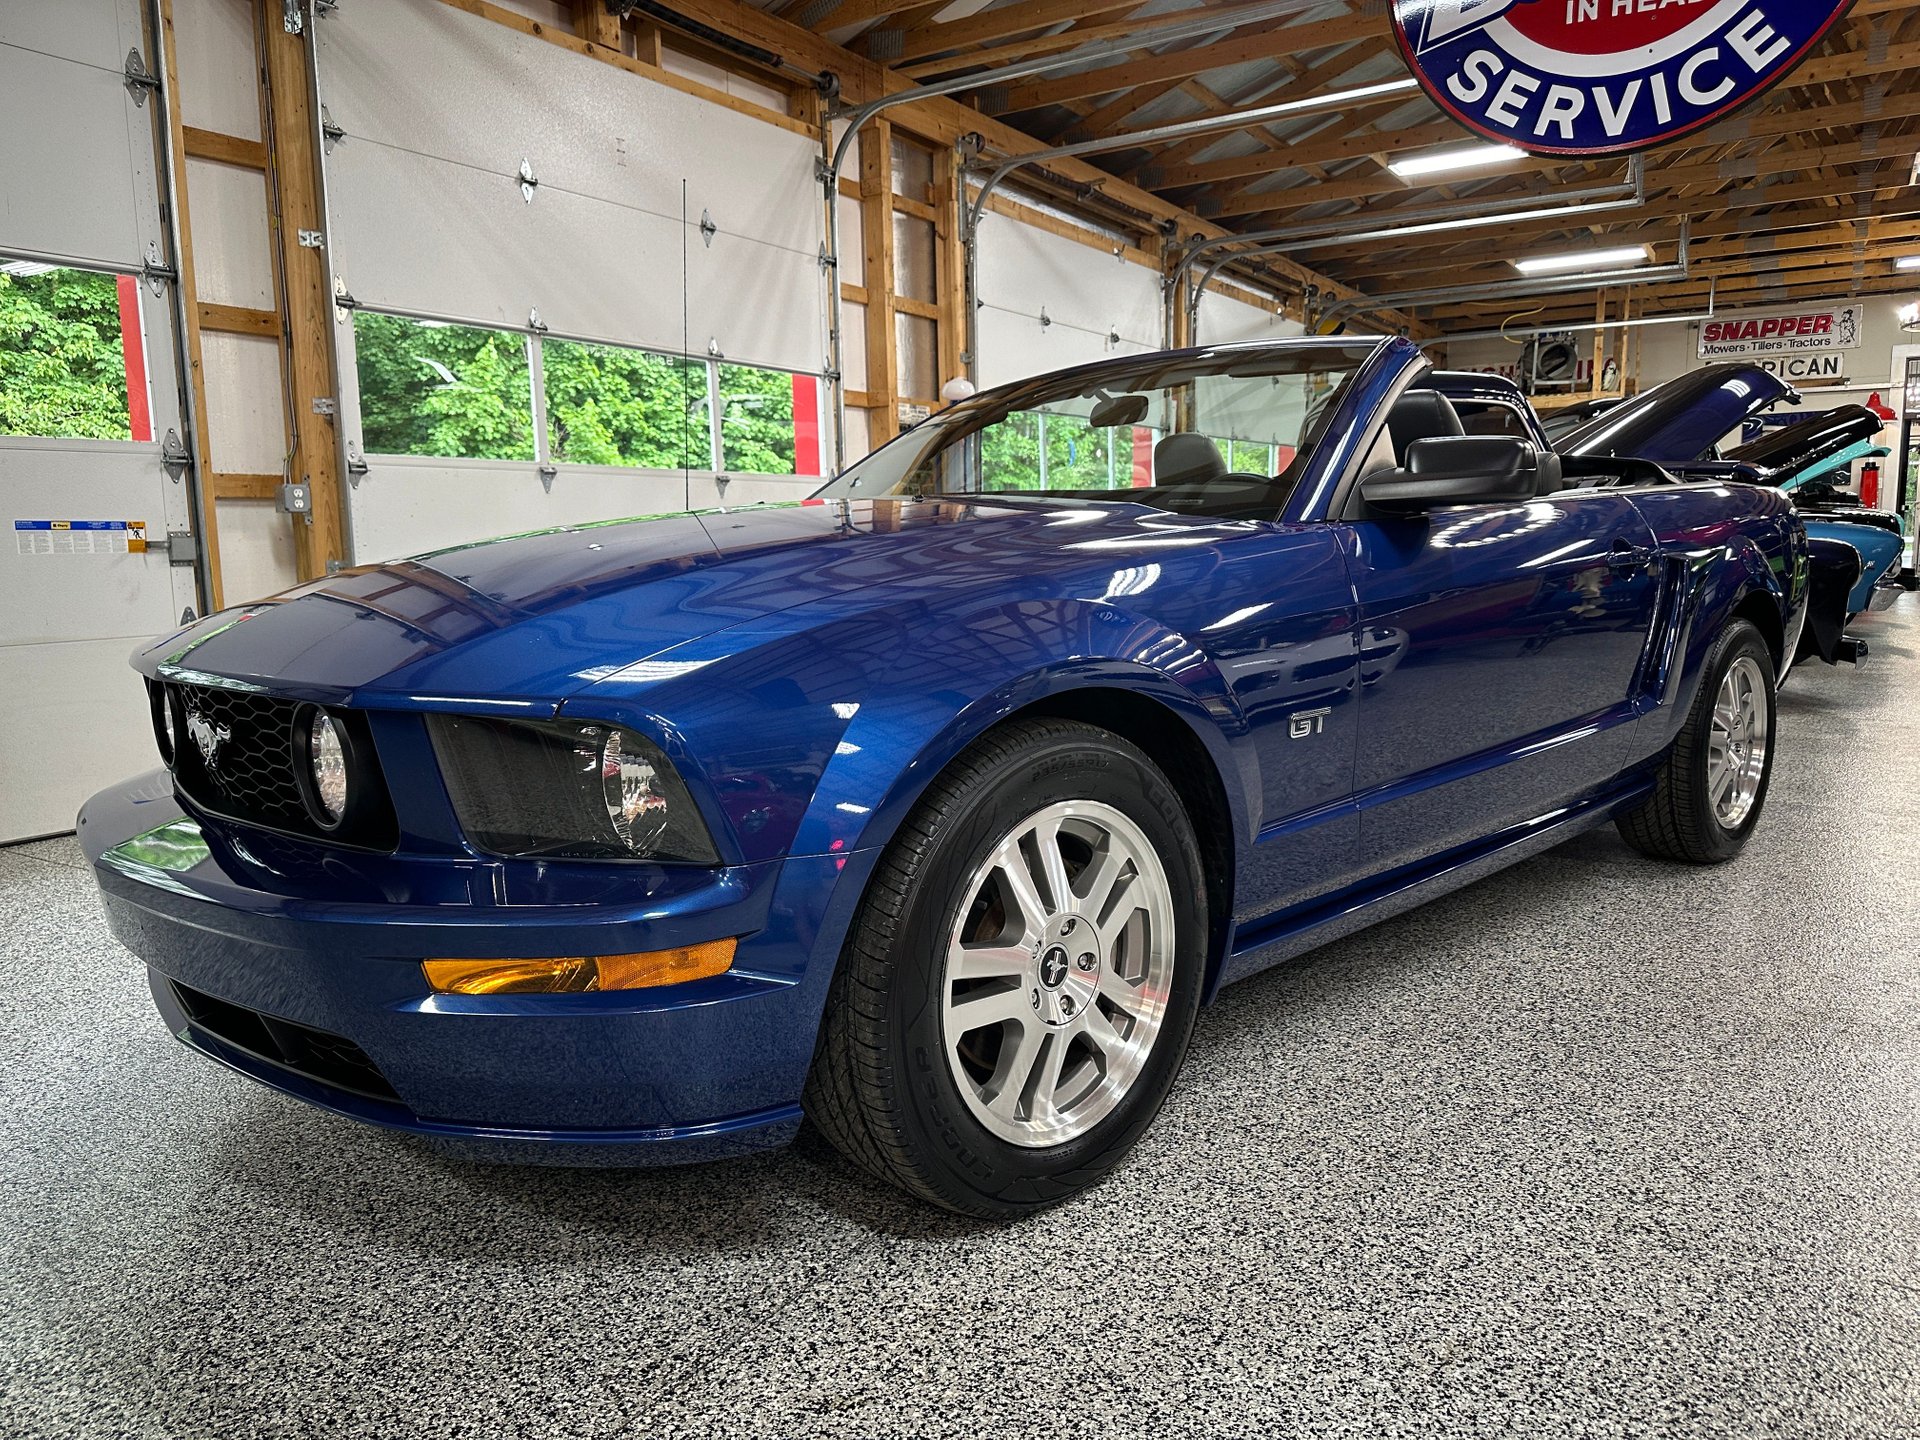 06-2568 | 2006 Ford Mustang | South Jersey Classics